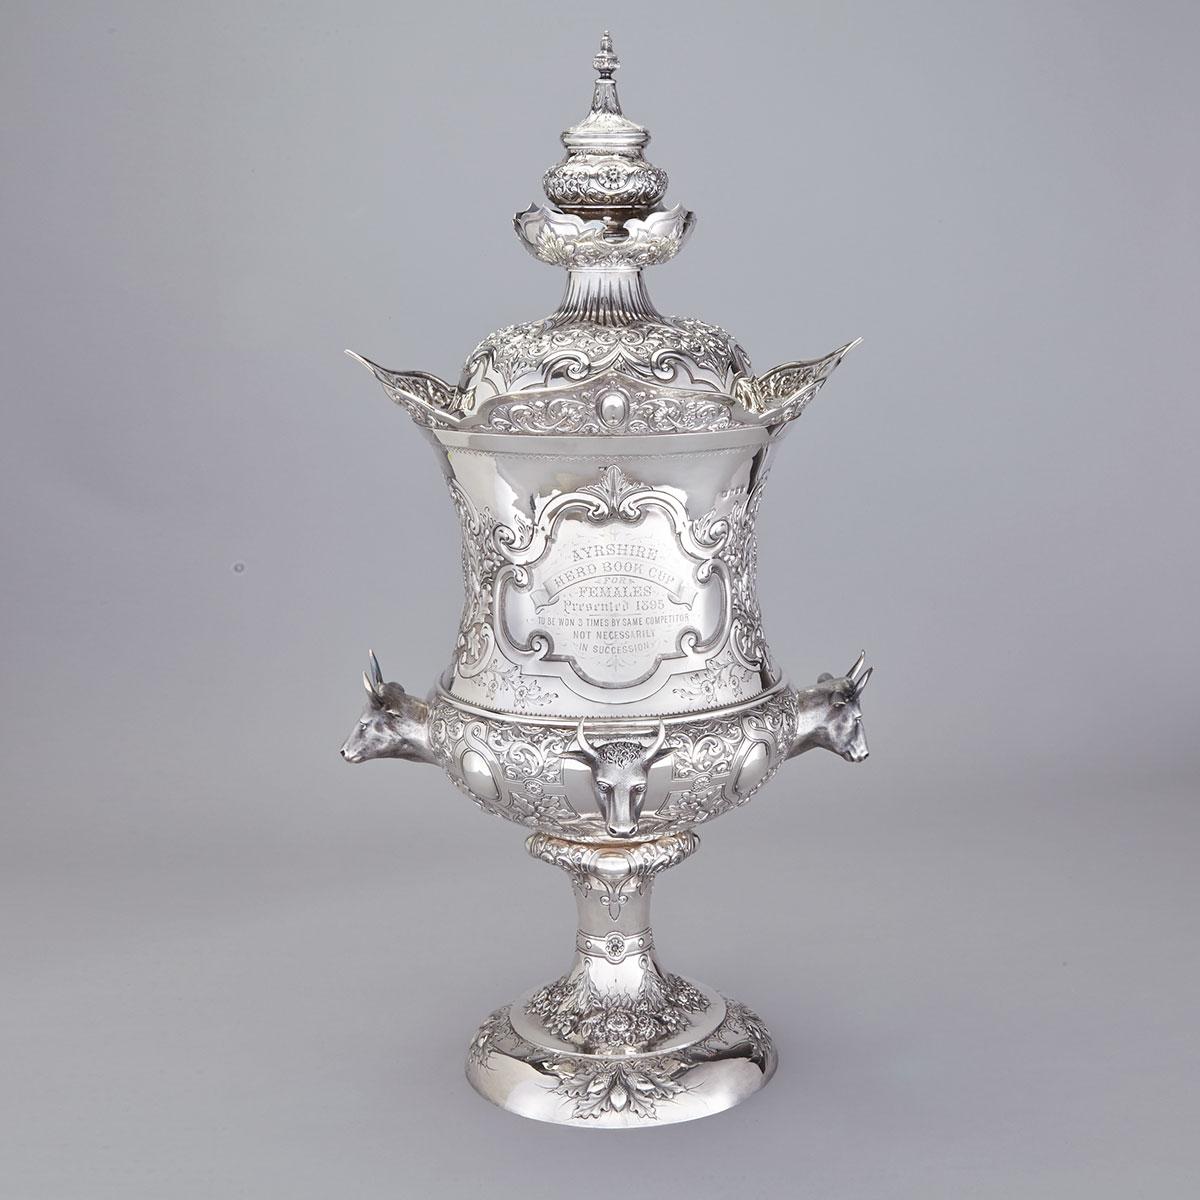 The Ayrshire Herd Book Cup  
Impressive Victorian Scottish Silver Covered Cup, Brown Kilk, Glasgow, 1895